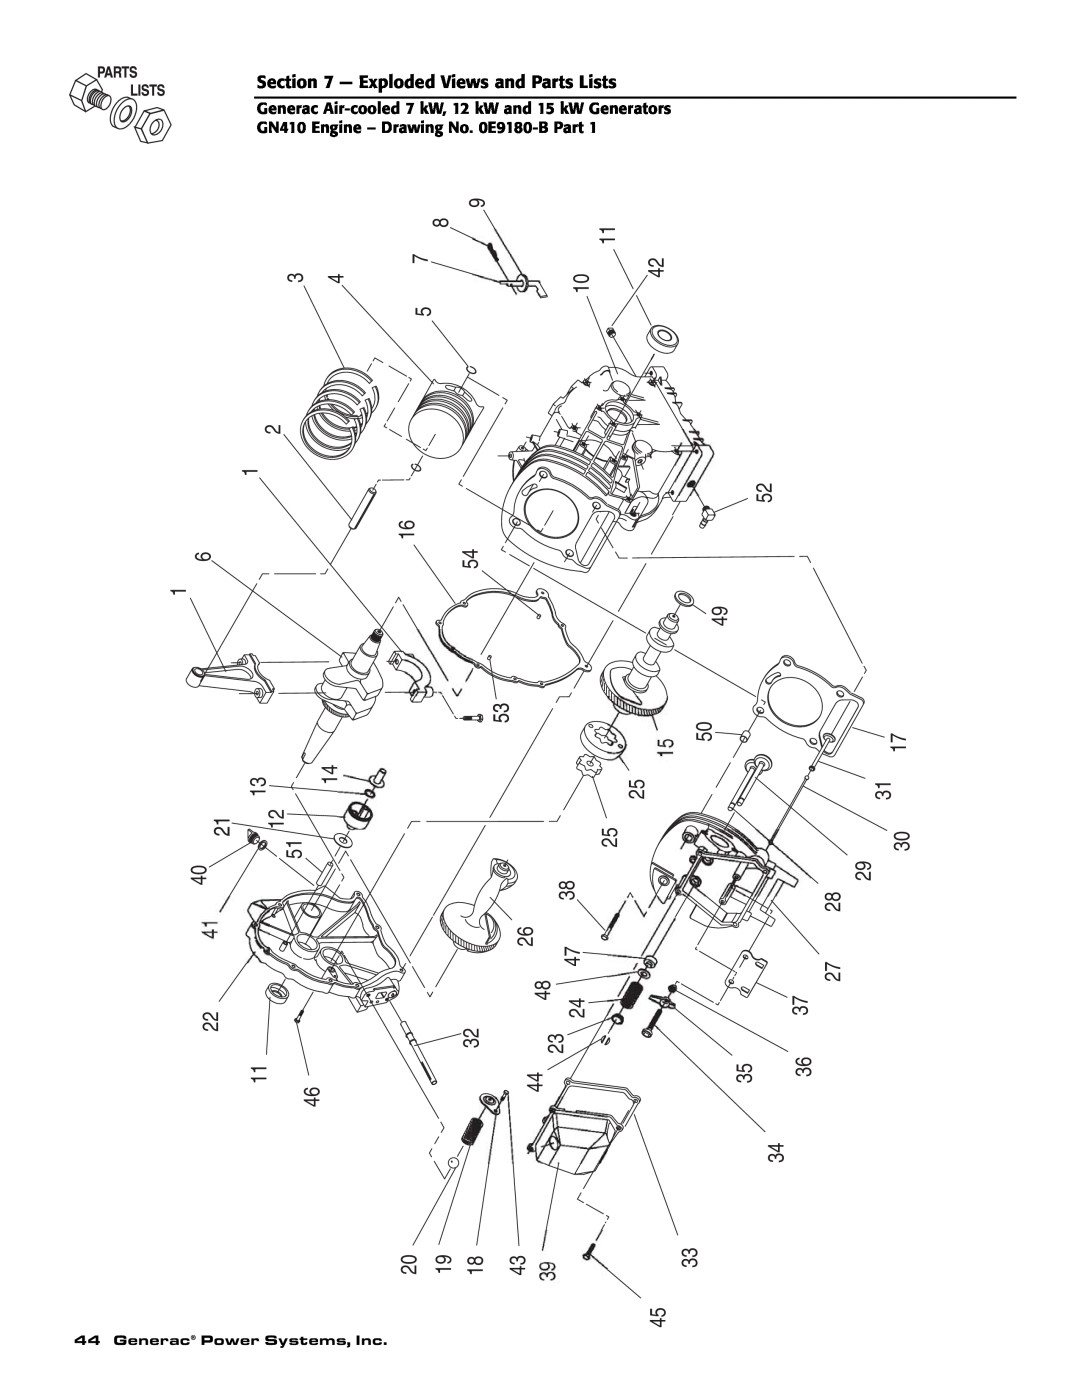 Generac 04675-3, 04673-2, 04674-2 owner manual Exploded Views and Parts Lists, Generac Power Systems, Inc 